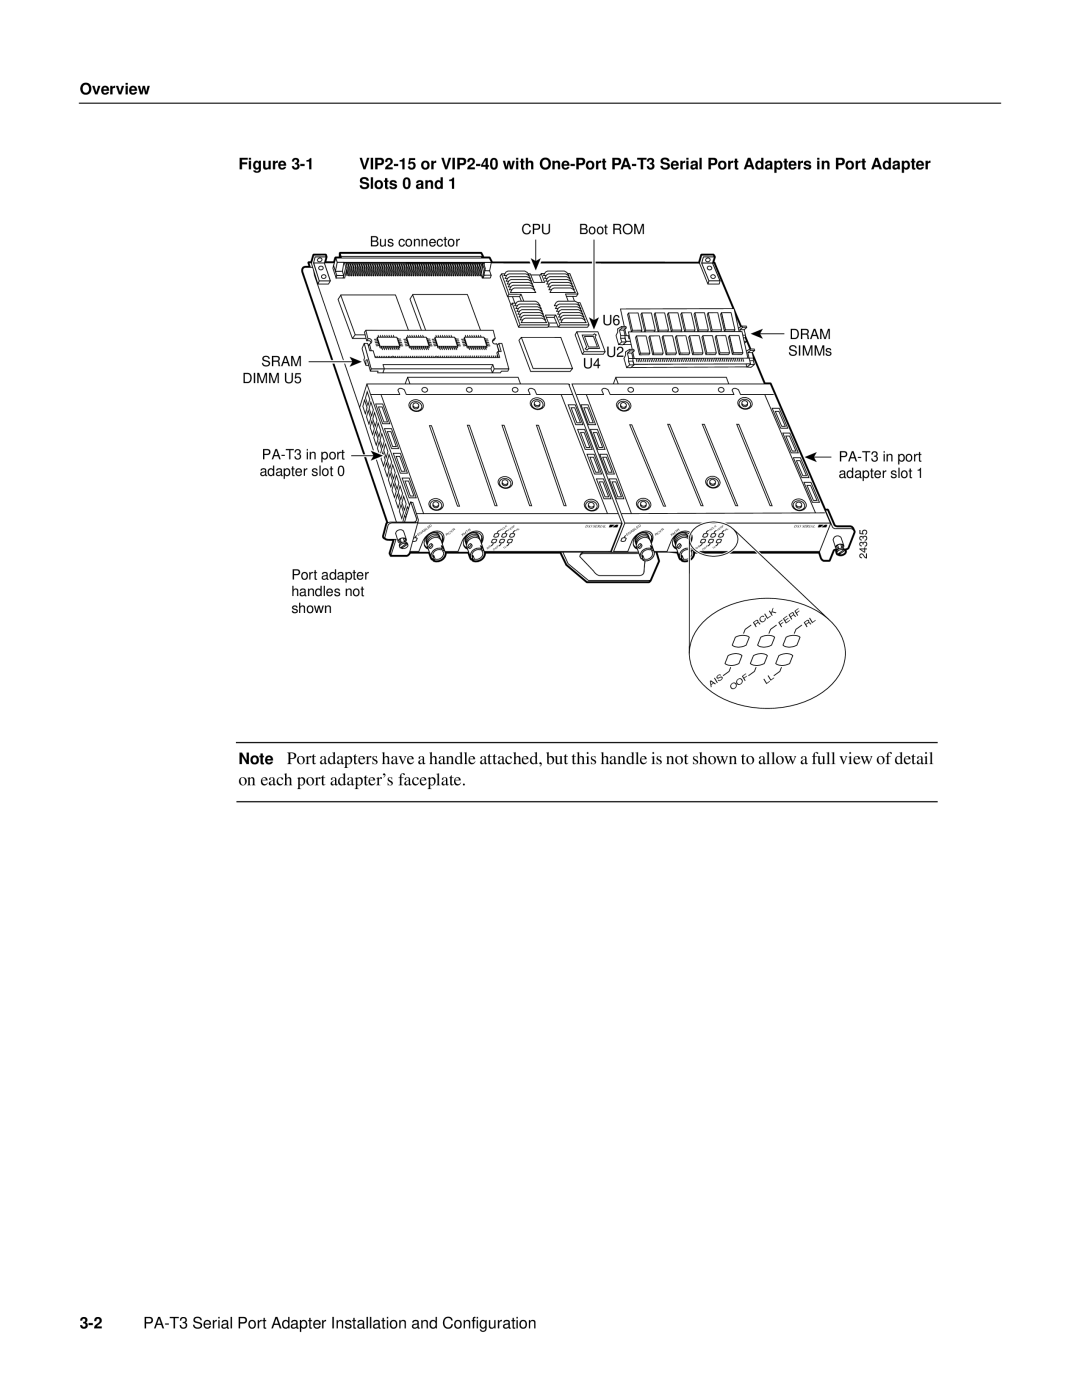 Cisco Systems manual Overview, PA-T3 Serial Port Adapter Installation and Configuration 